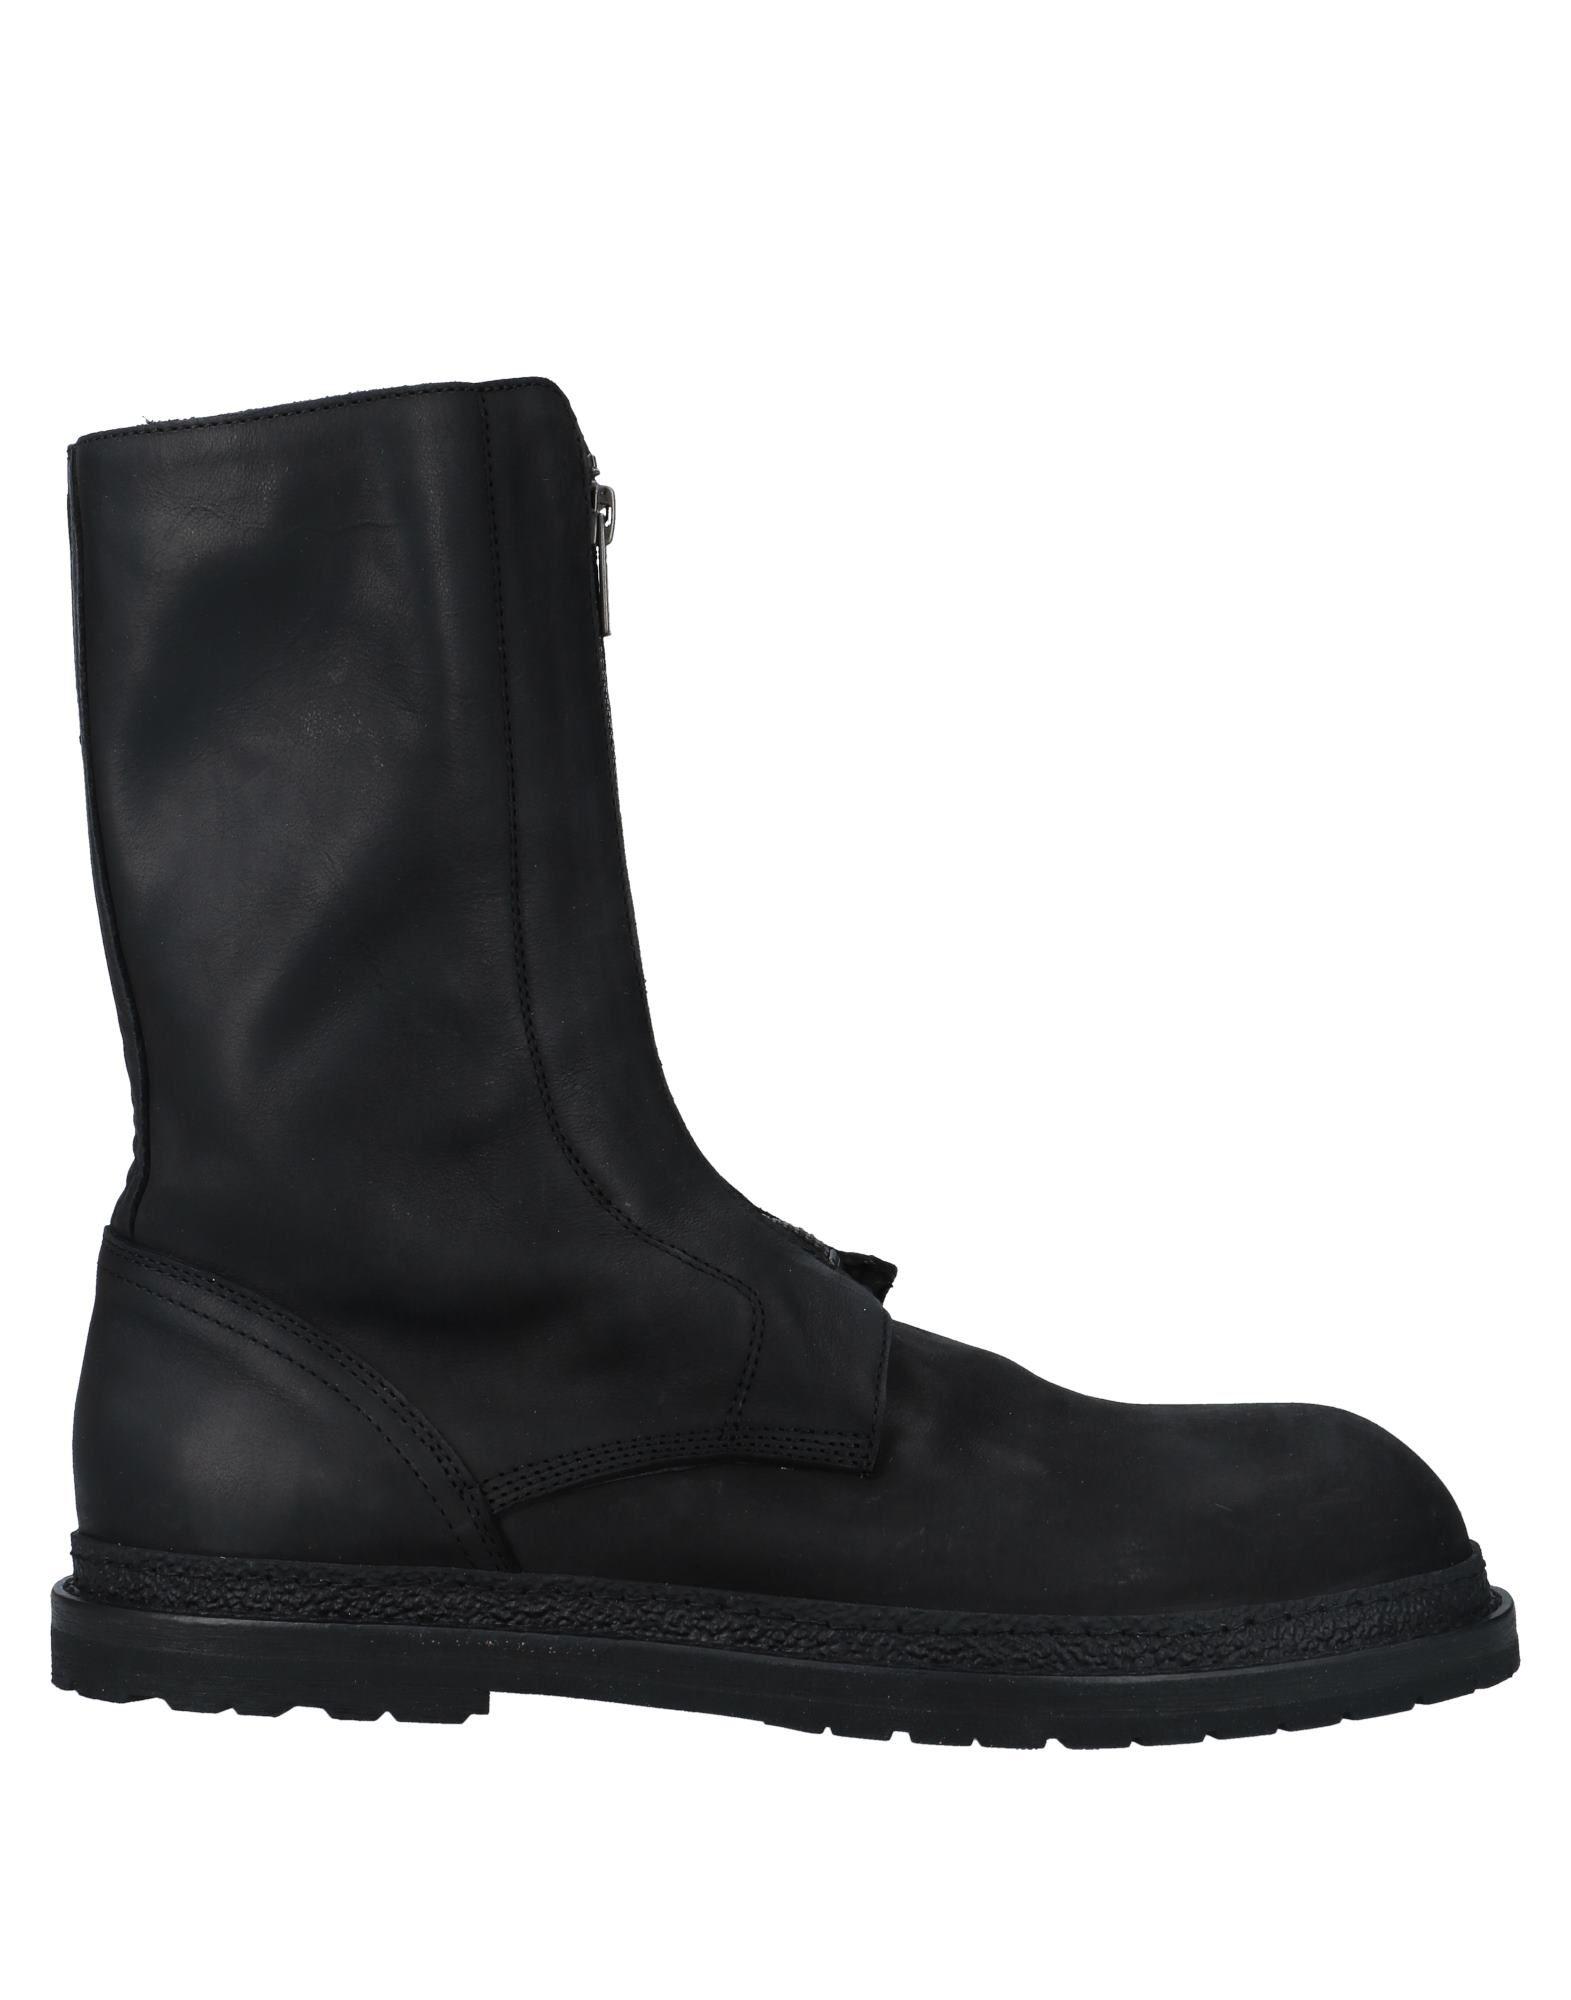 Ann Demeulemeester Leather Boots in Black for Men - Lyst